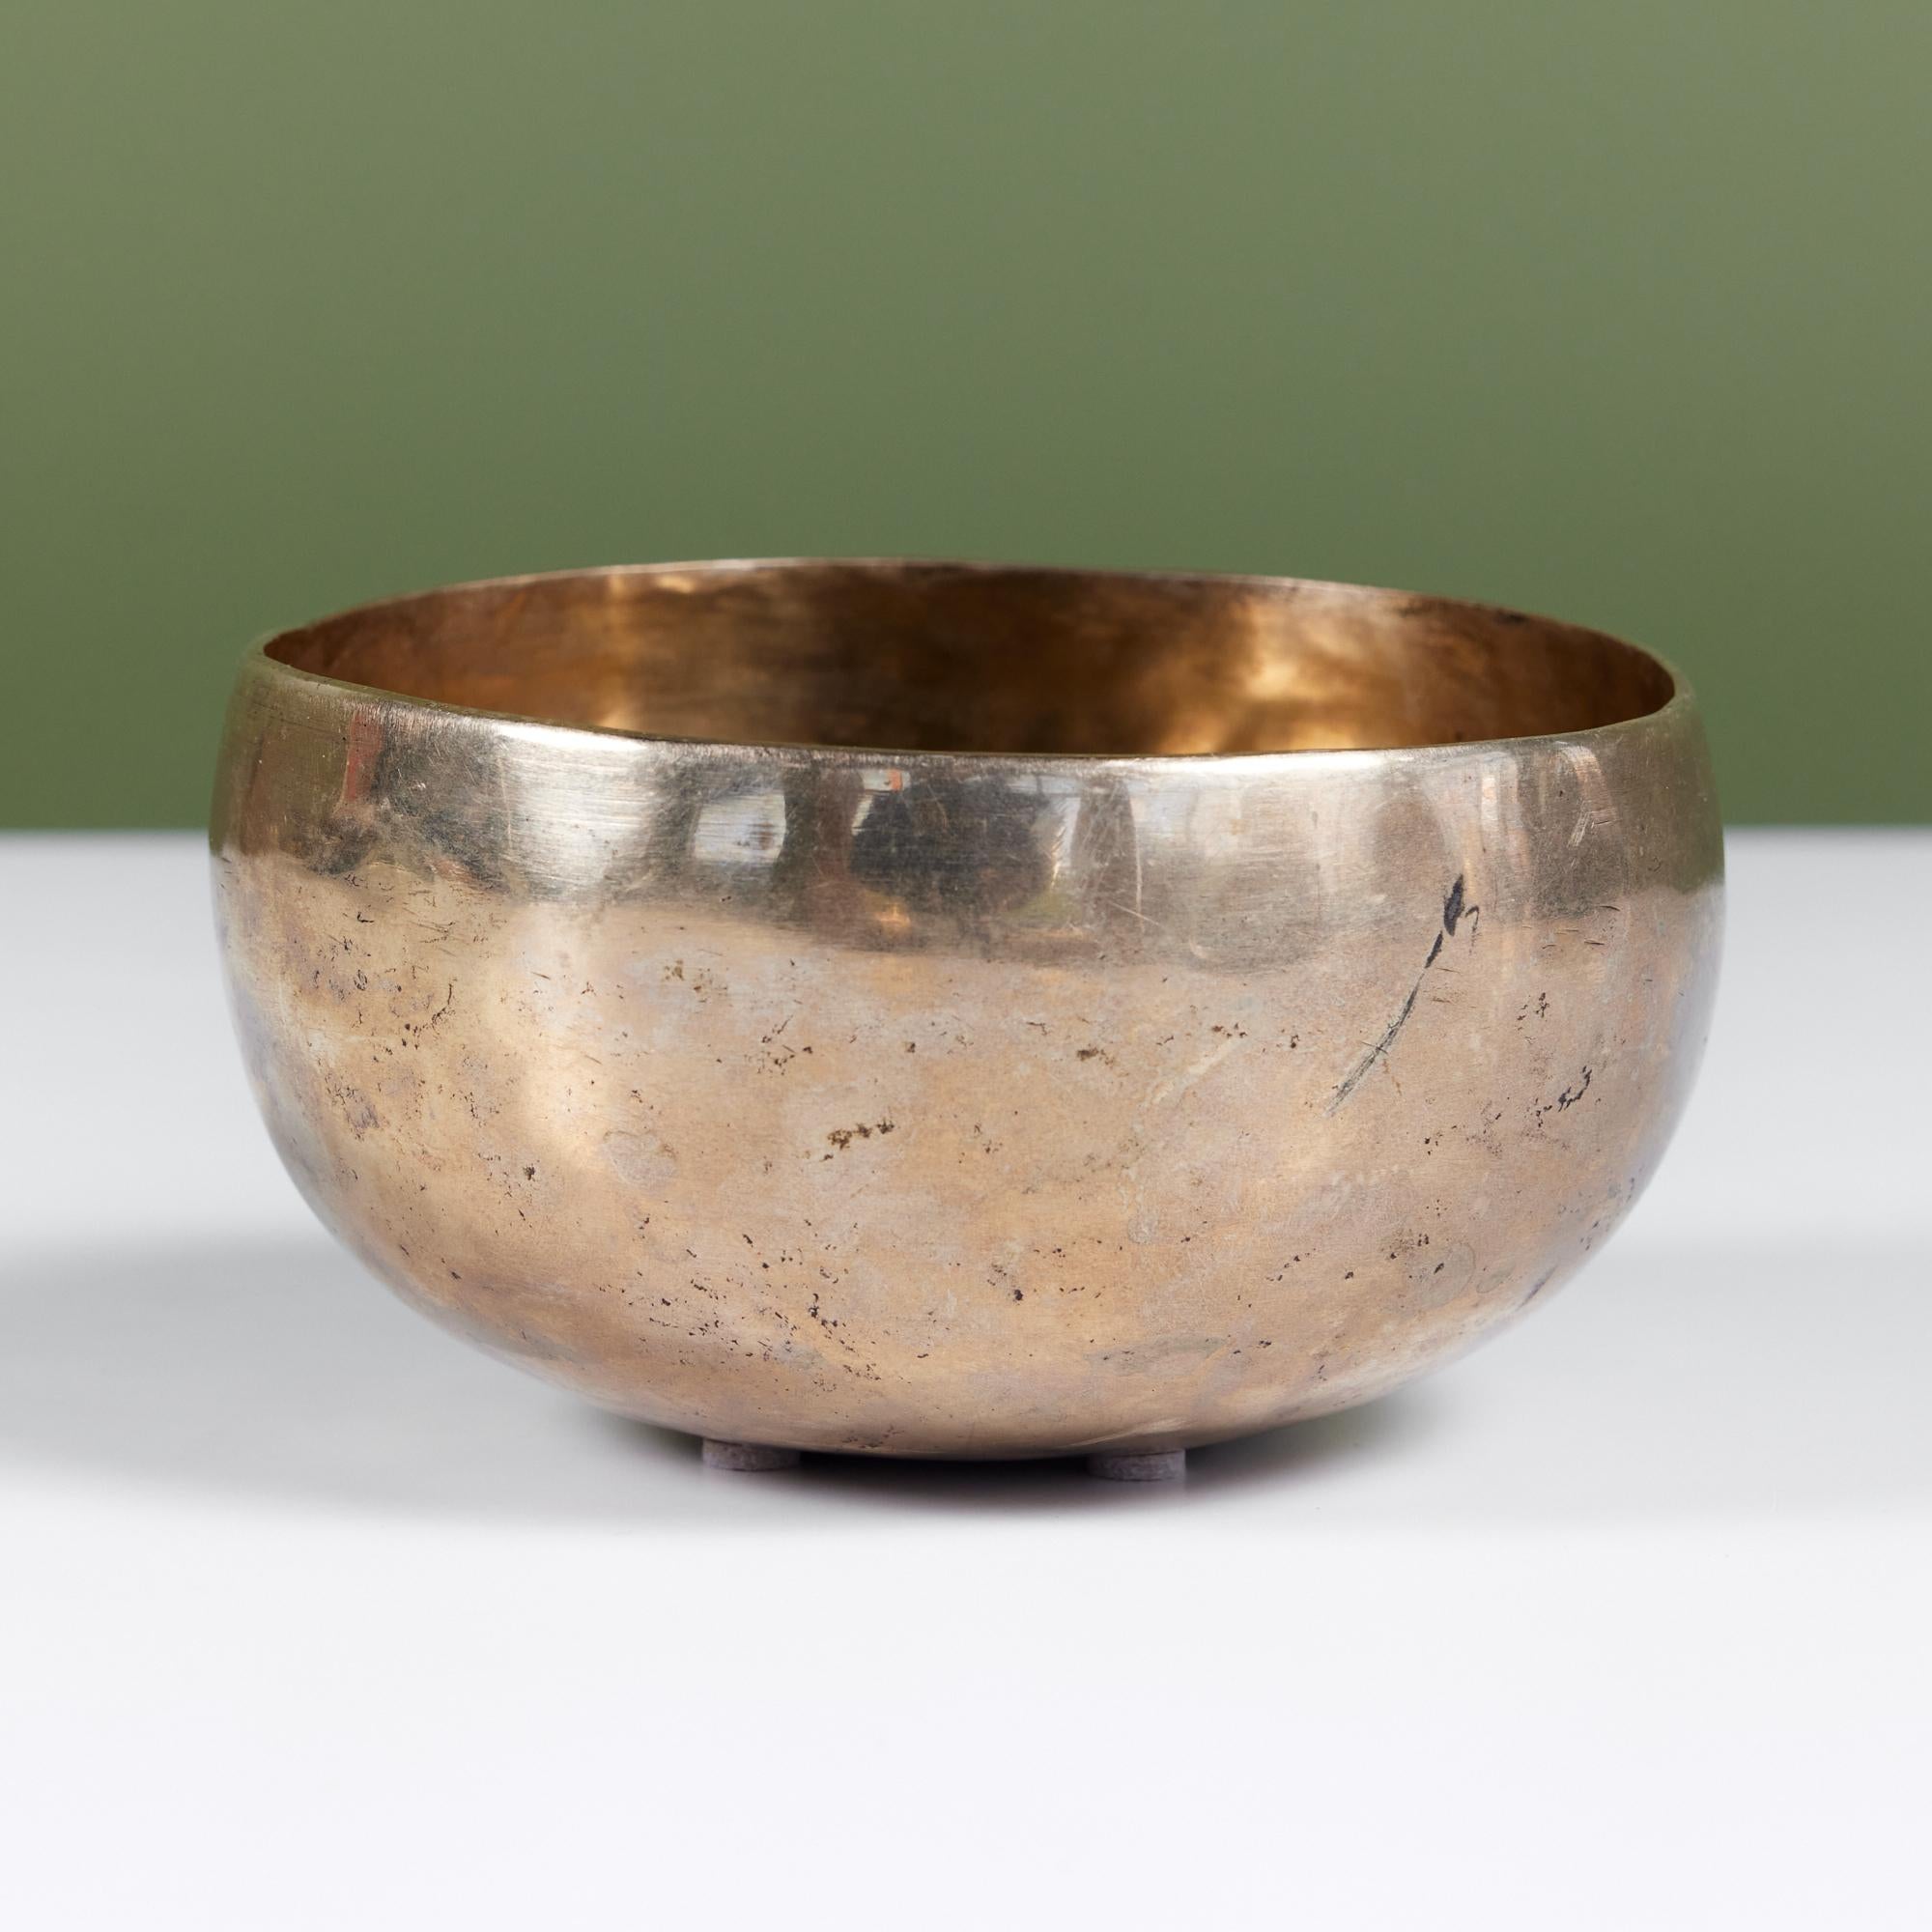 Patinated bronze bowl with a rounded lip and hammered body featuring Tibetan script. You can bring out higher tones in the bowl by using a mallet around the rim. It can also be used as catchall for your pocket objects, or just a bold decorative